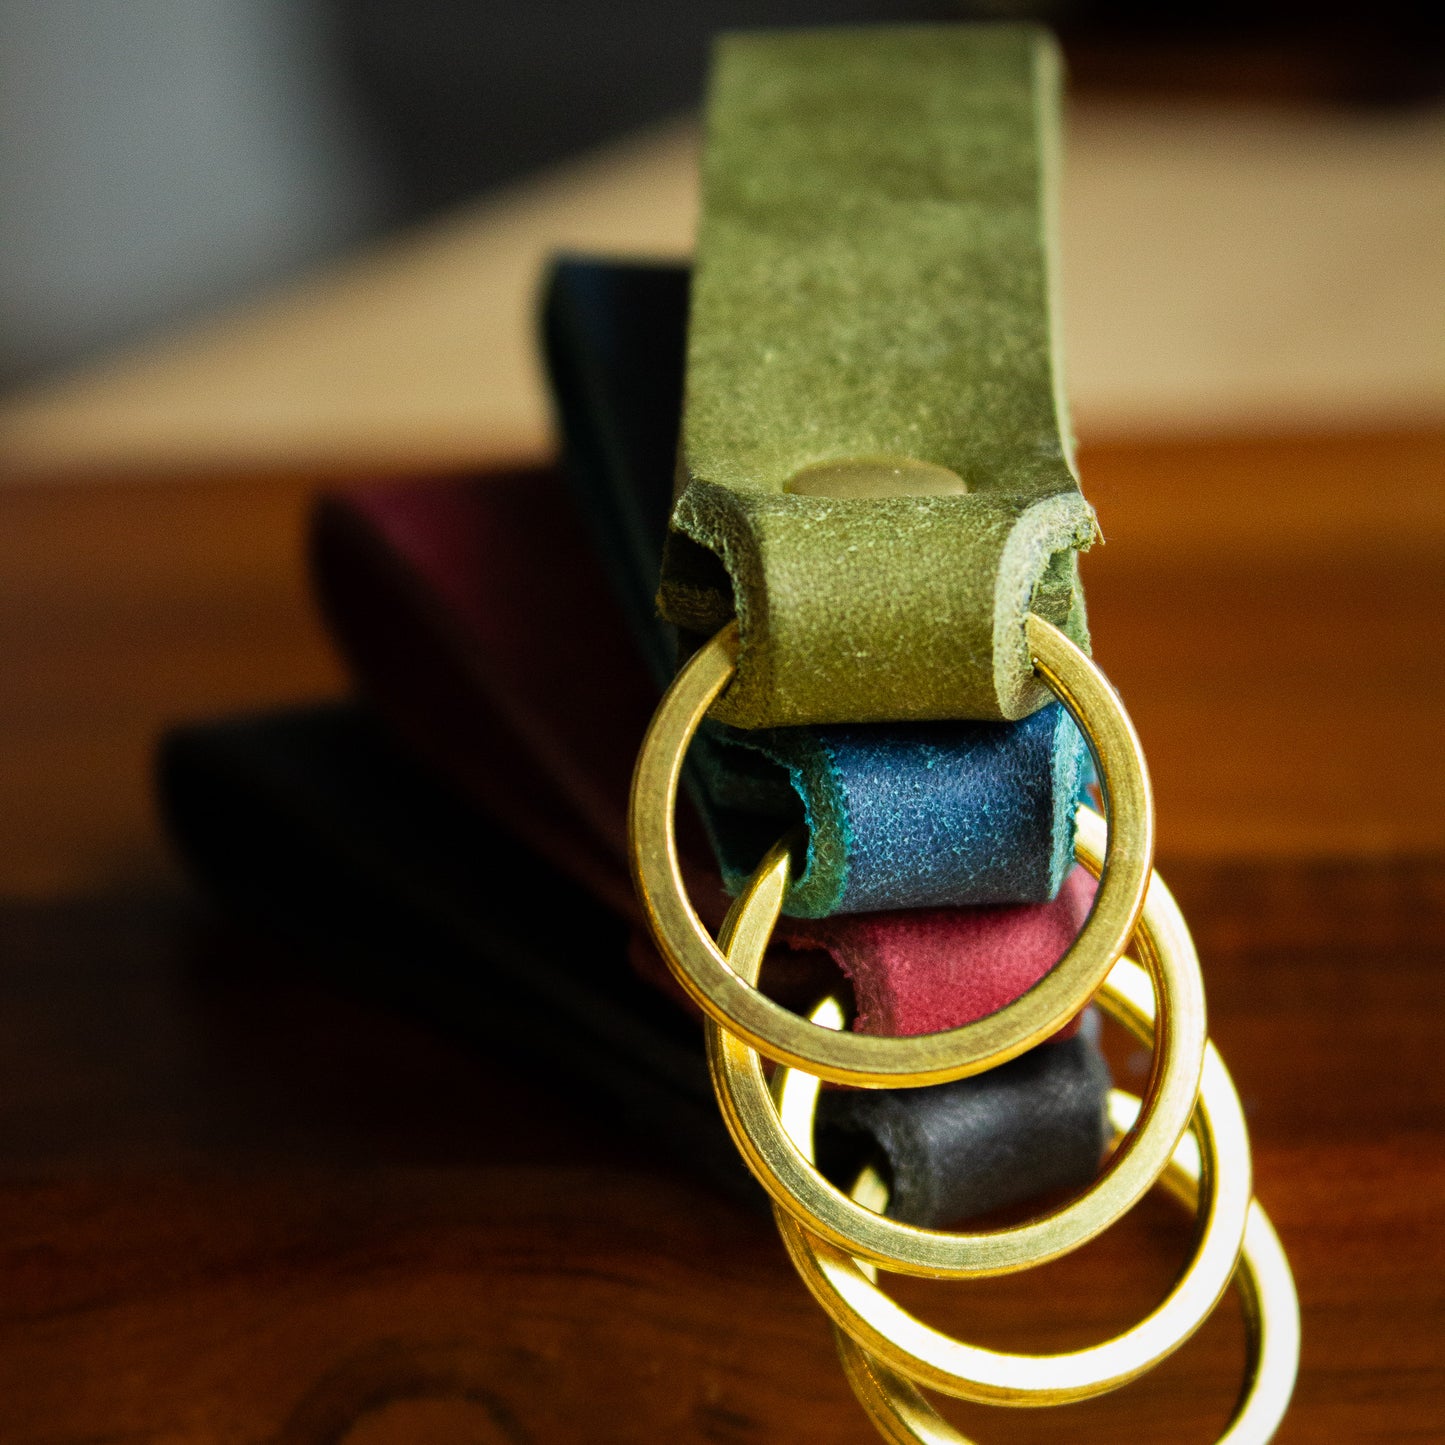 handmade leather keytags with solid brass keyring and rivet on top of wooden chopping board - Made from Peublo leather - blue, black, green, red - close up split rings